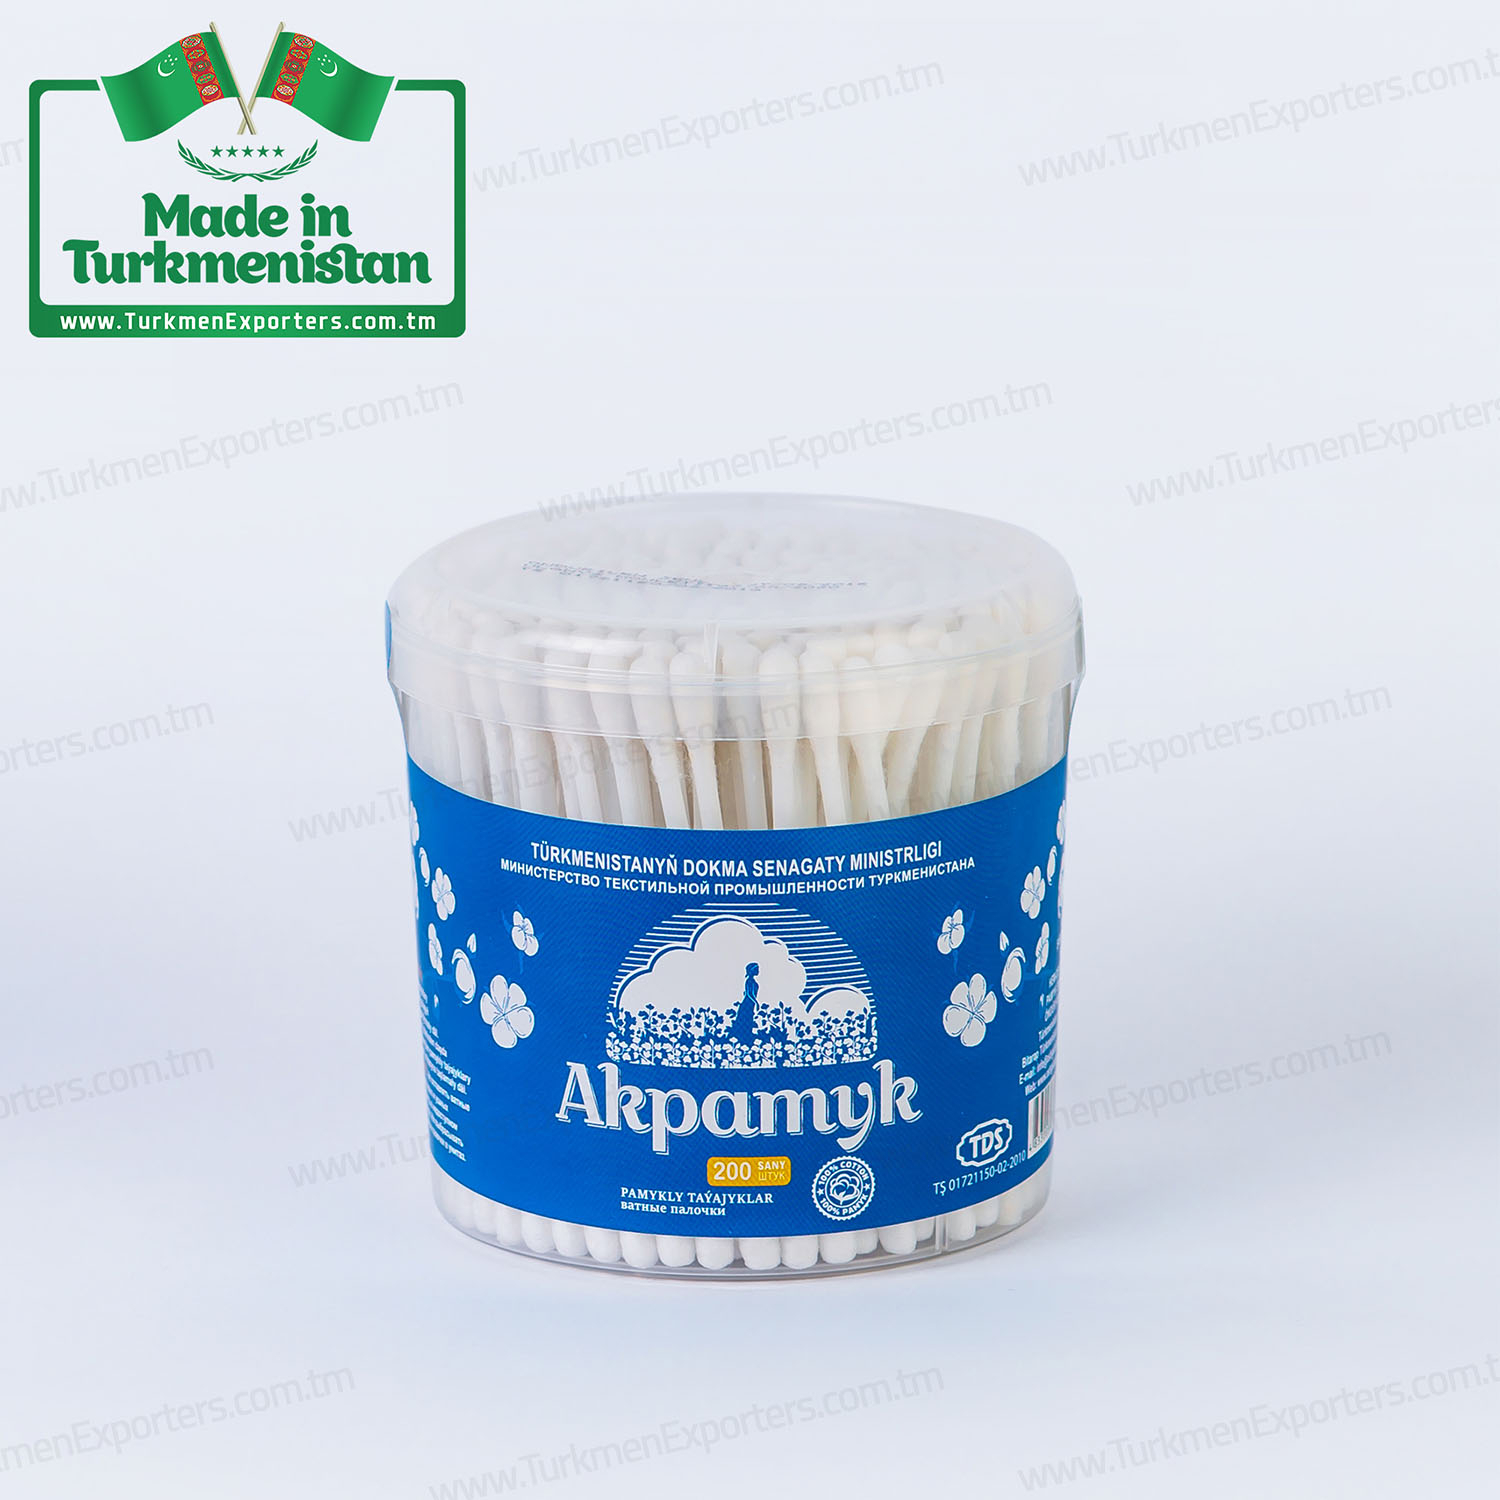 Cotton buds wholesale from Turkmenistan | Ashgabat factory for production of medical wadding and cosmetic cotton products